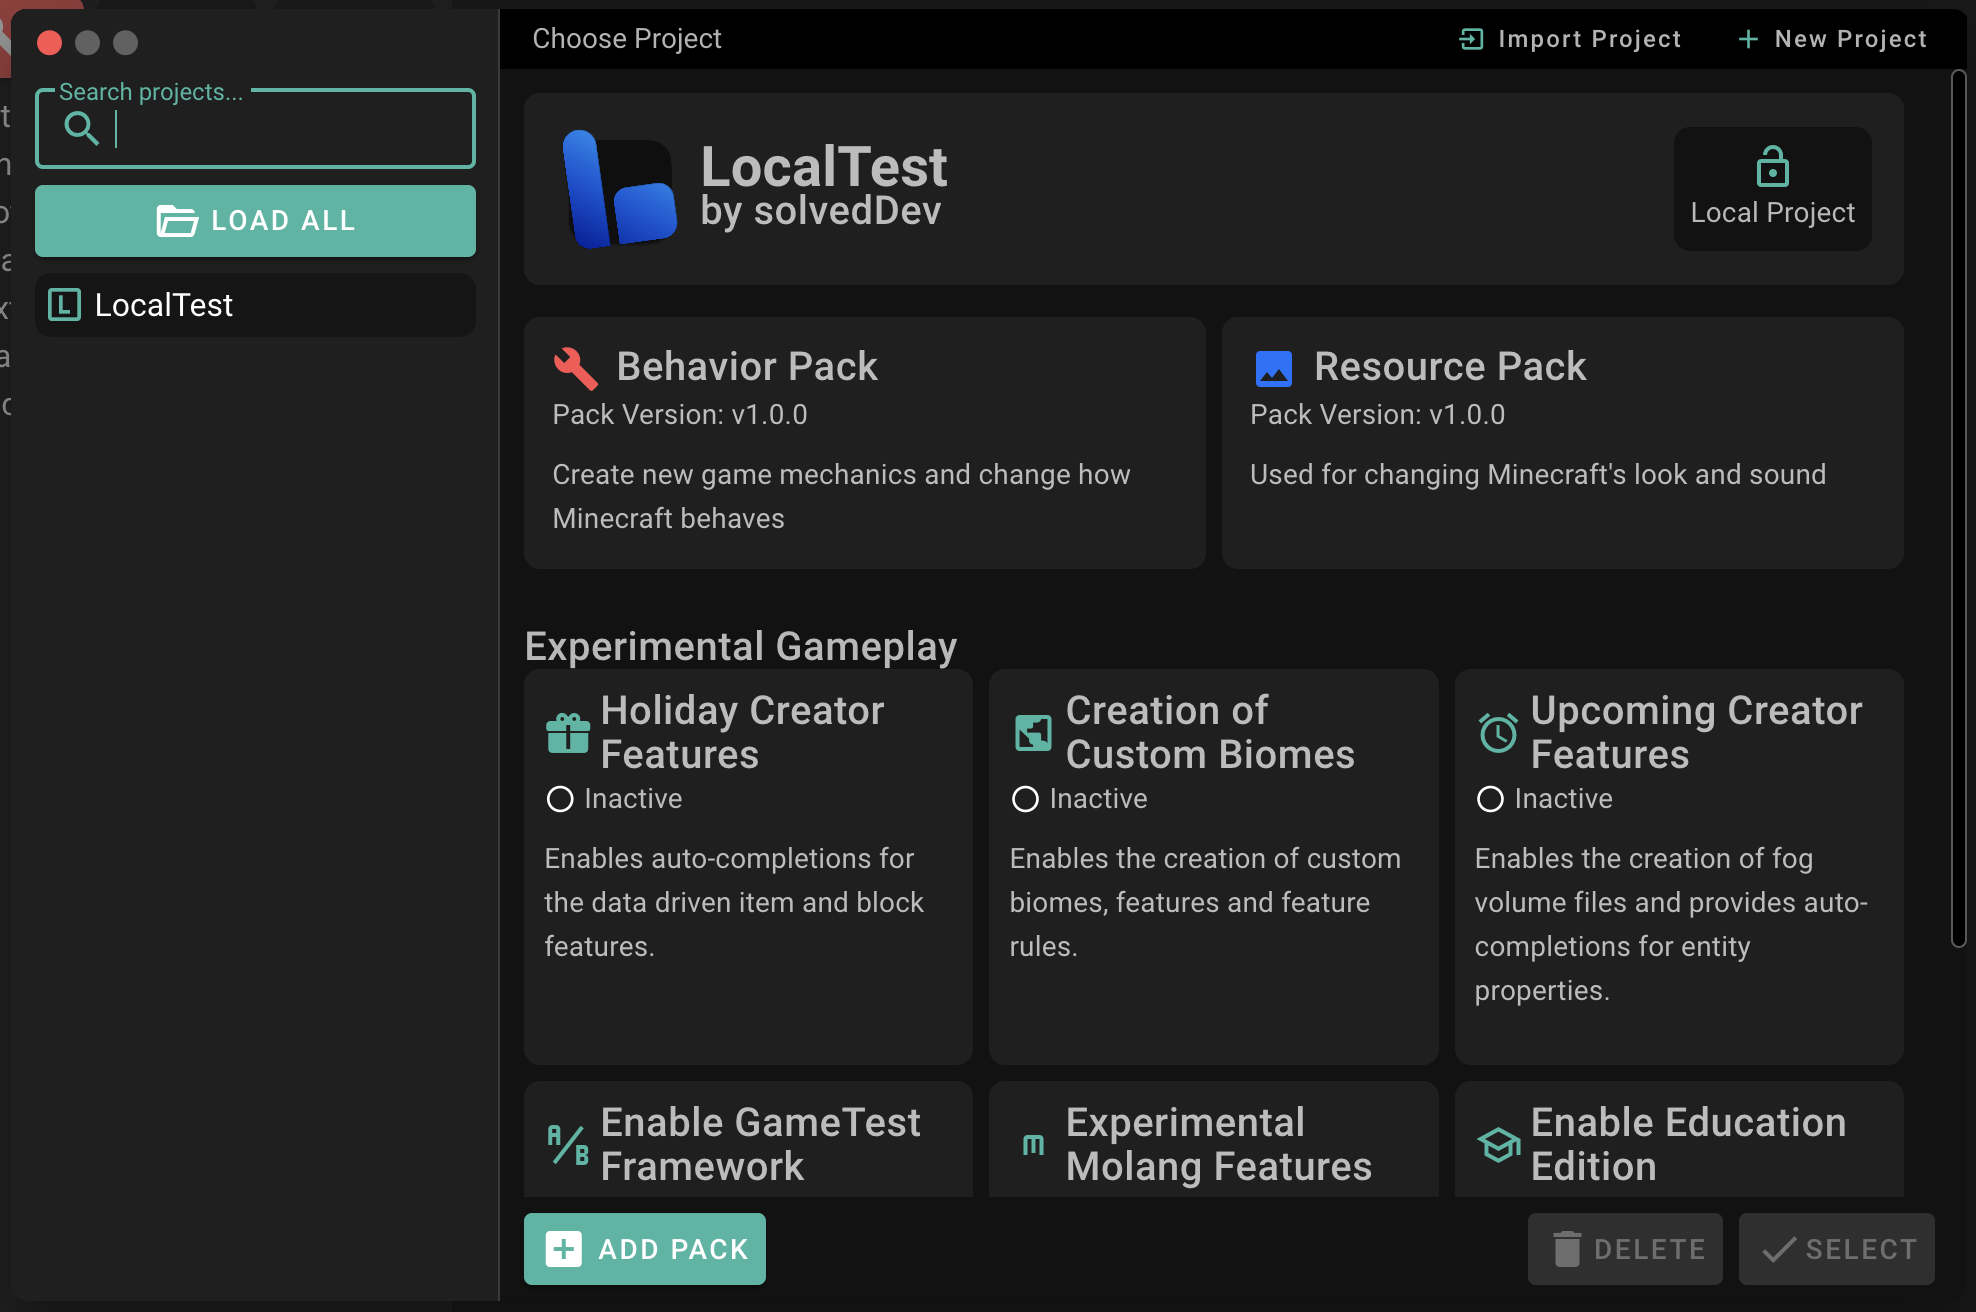 Screenshot of bridge.'s project chooser showing the local project badge.